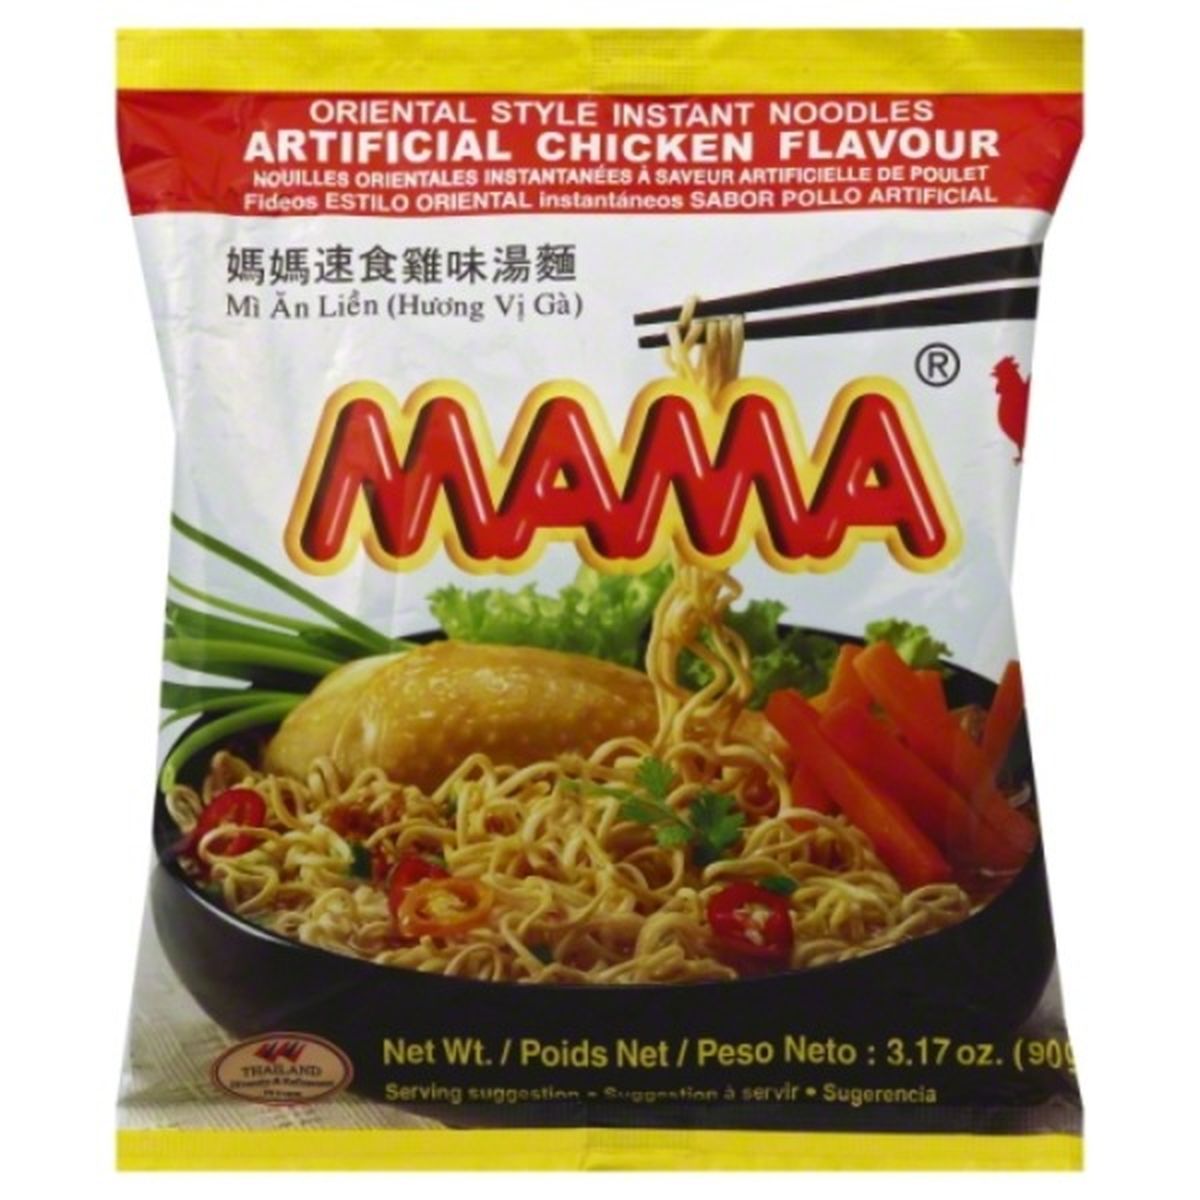 Calories in Mama Instant Noodles, Oriental Style, Aritifical Chicken Flavour